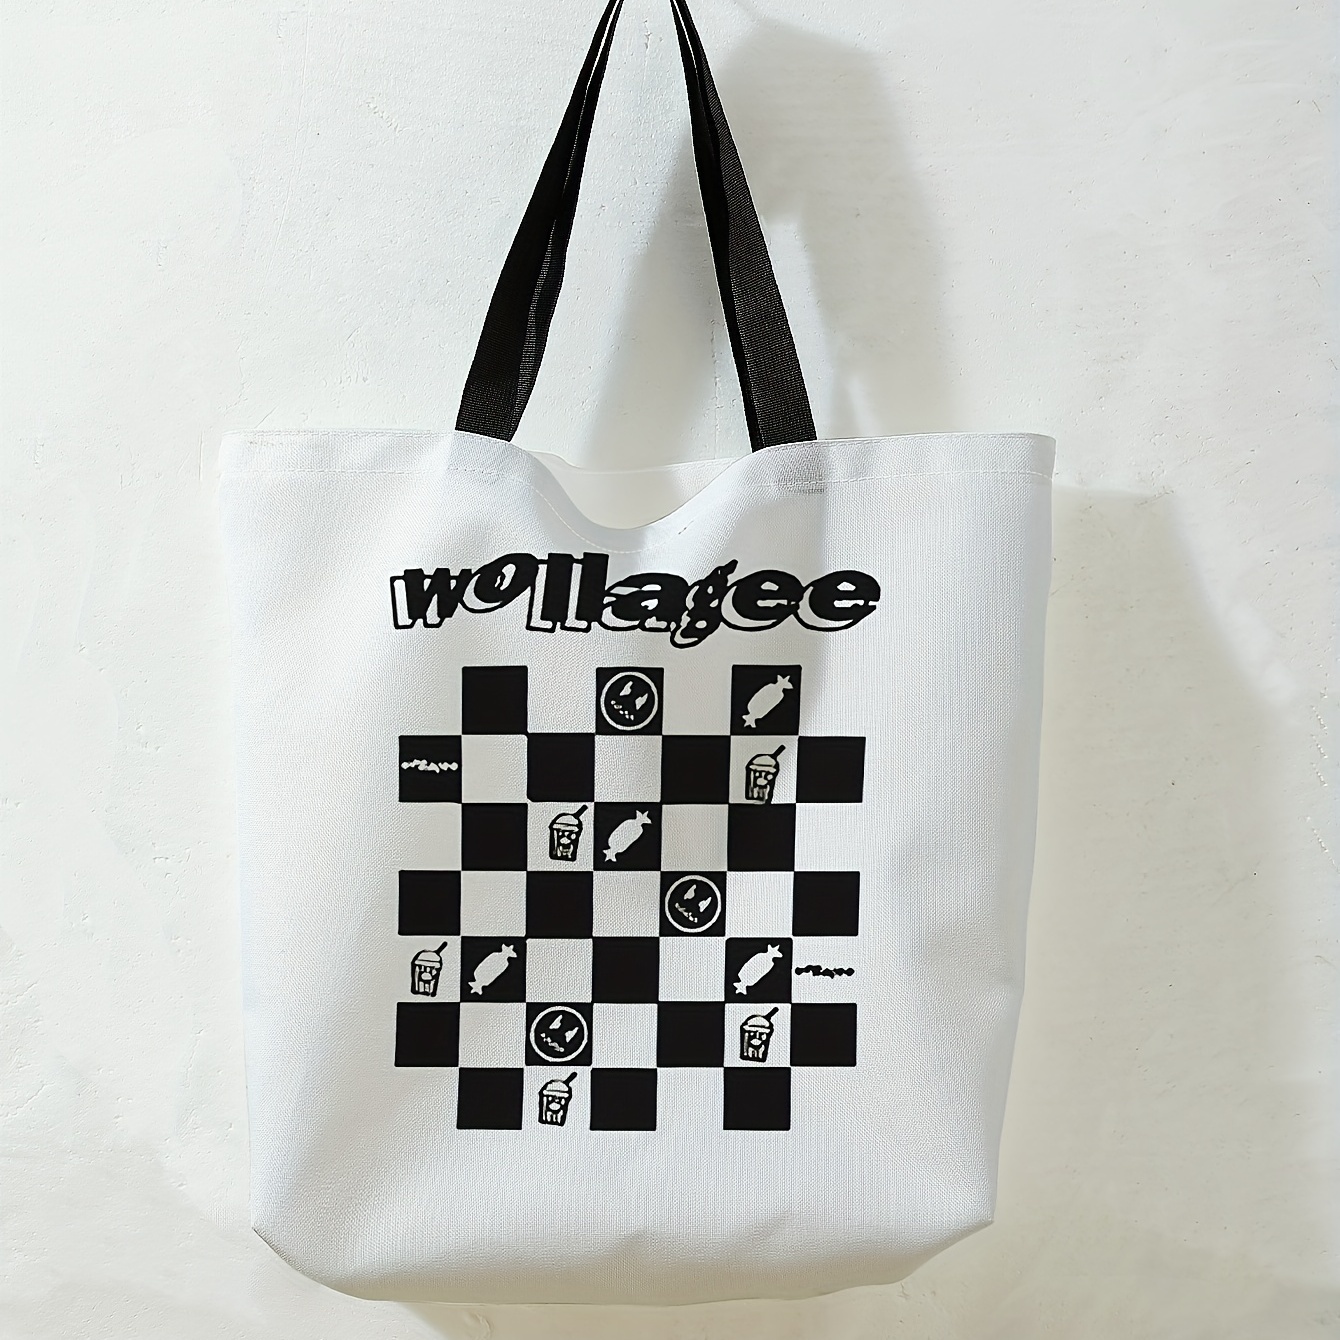 Tote Bag Aesthetic, Tote Bags White, Shopping Bags, Shoppers Bags